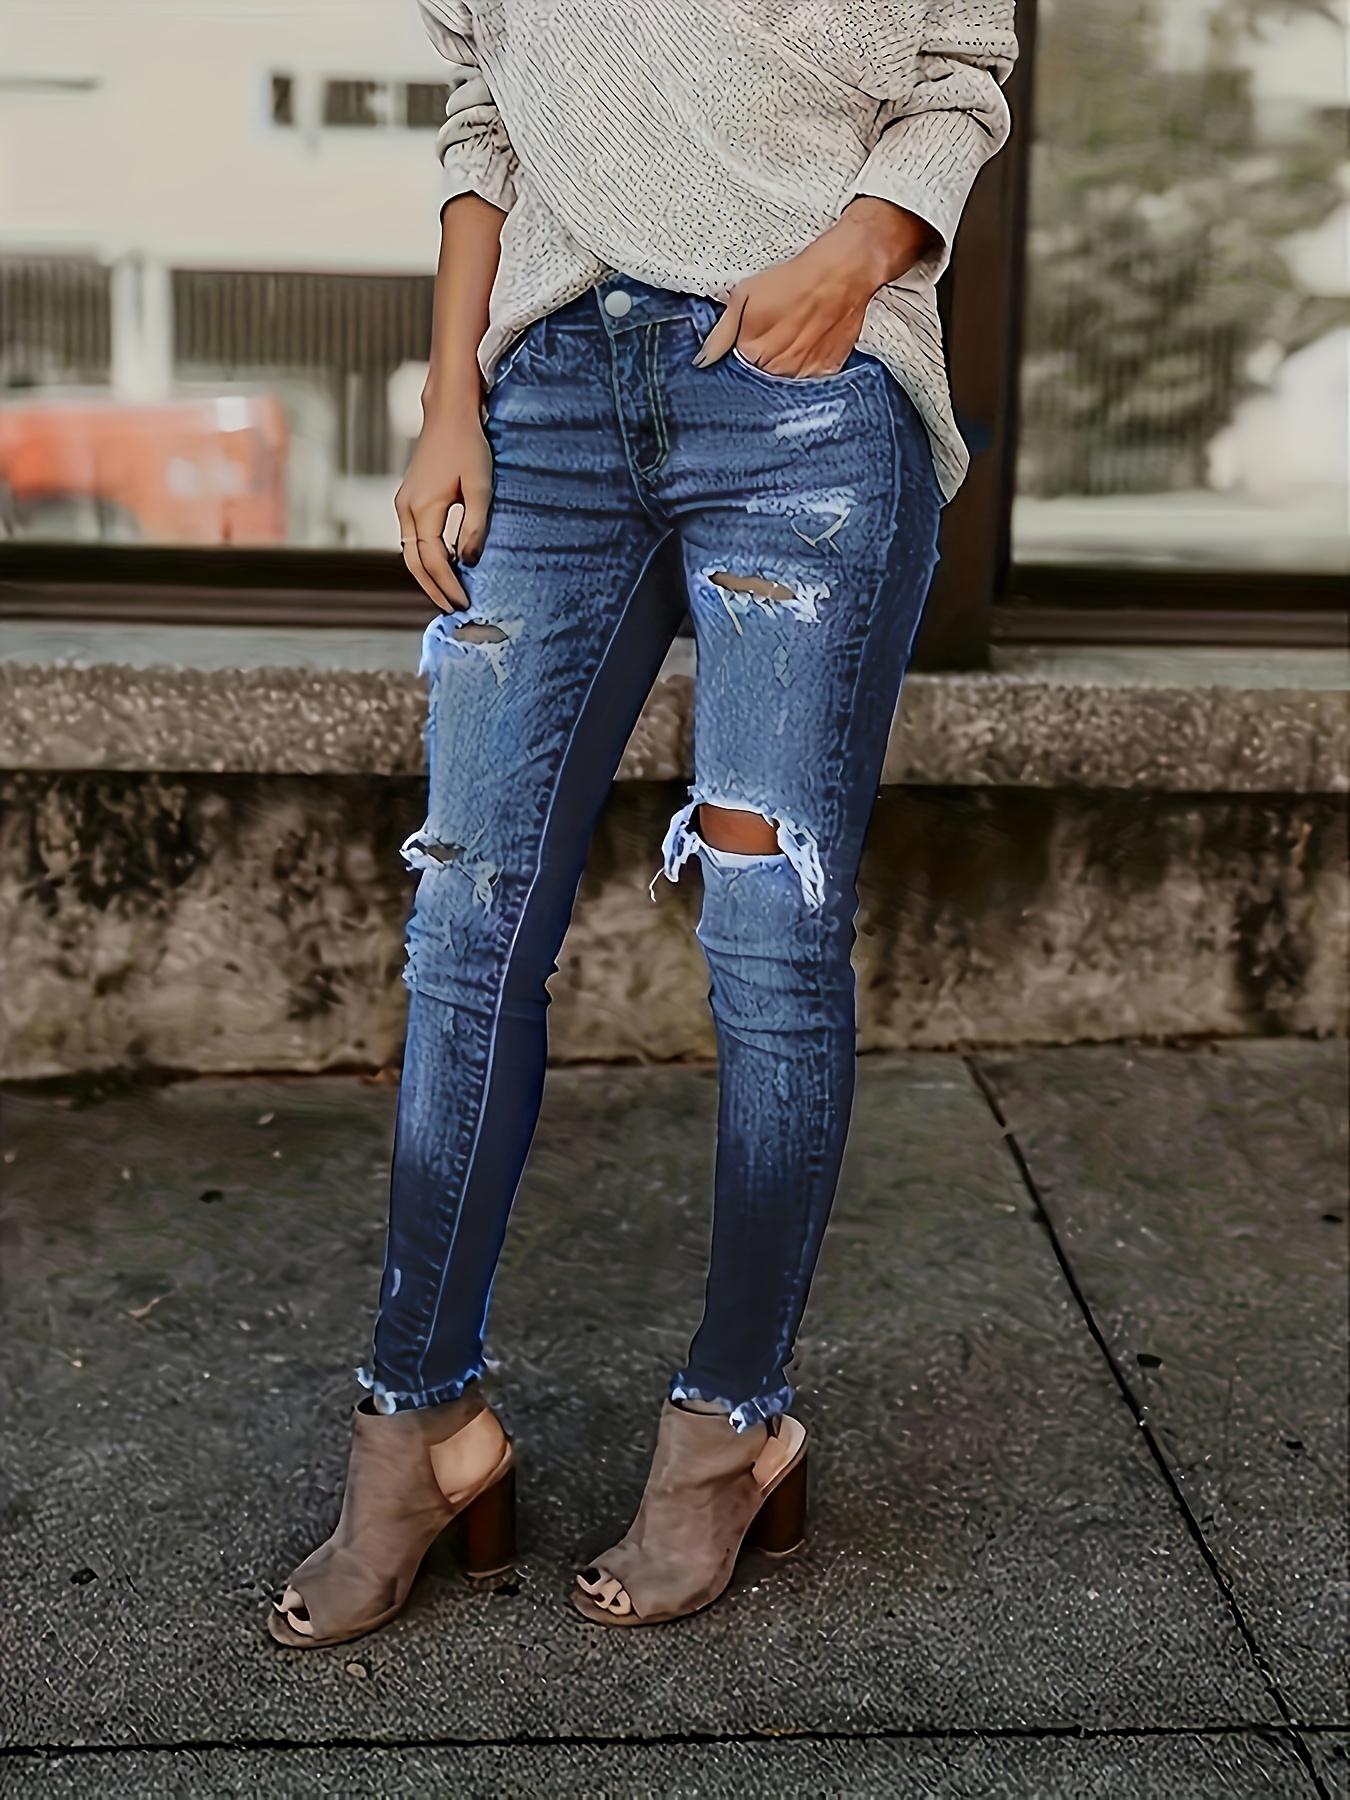 Ripped Jeans For Women and Juniors | Distressed Jean Jeggings | Skinny  Jeans | Medium Wash Denim Pants